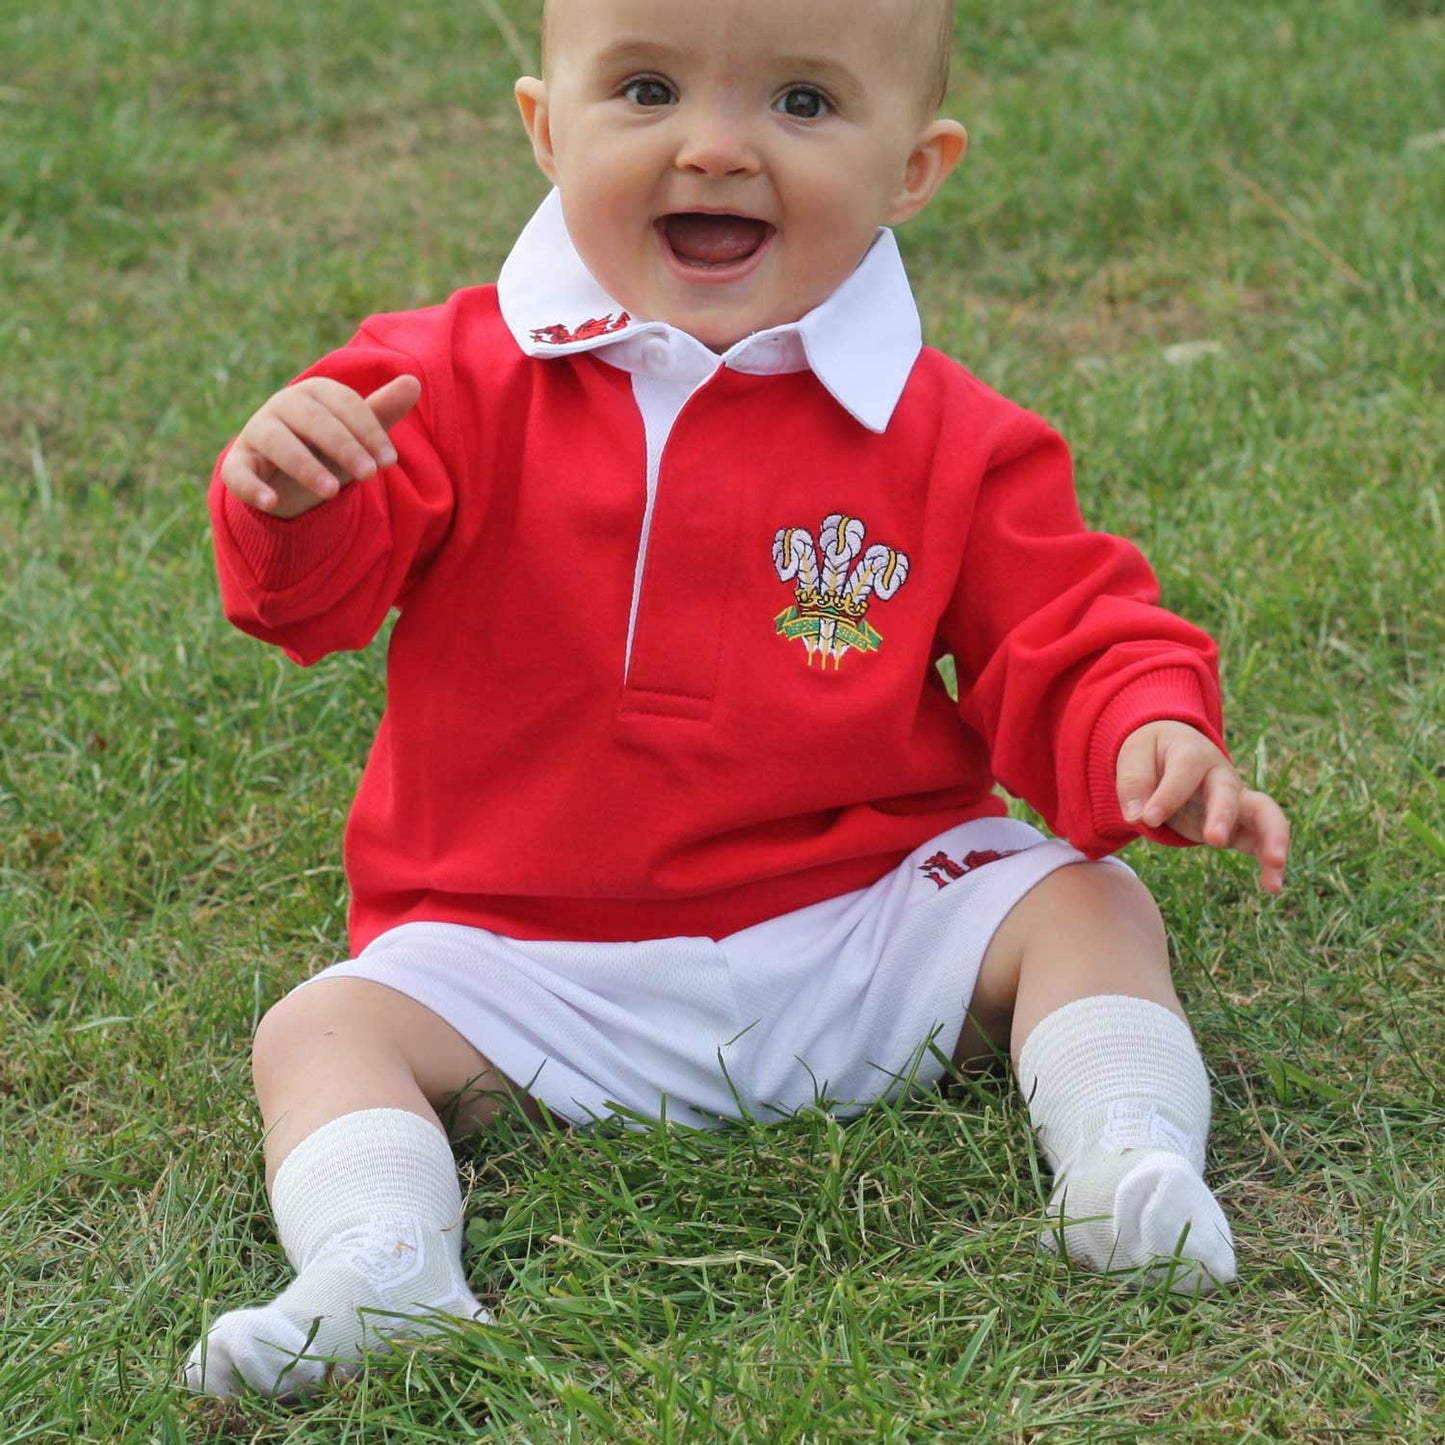 Welsh Rugby Shirt - Traditional Long Sleeve - Baby